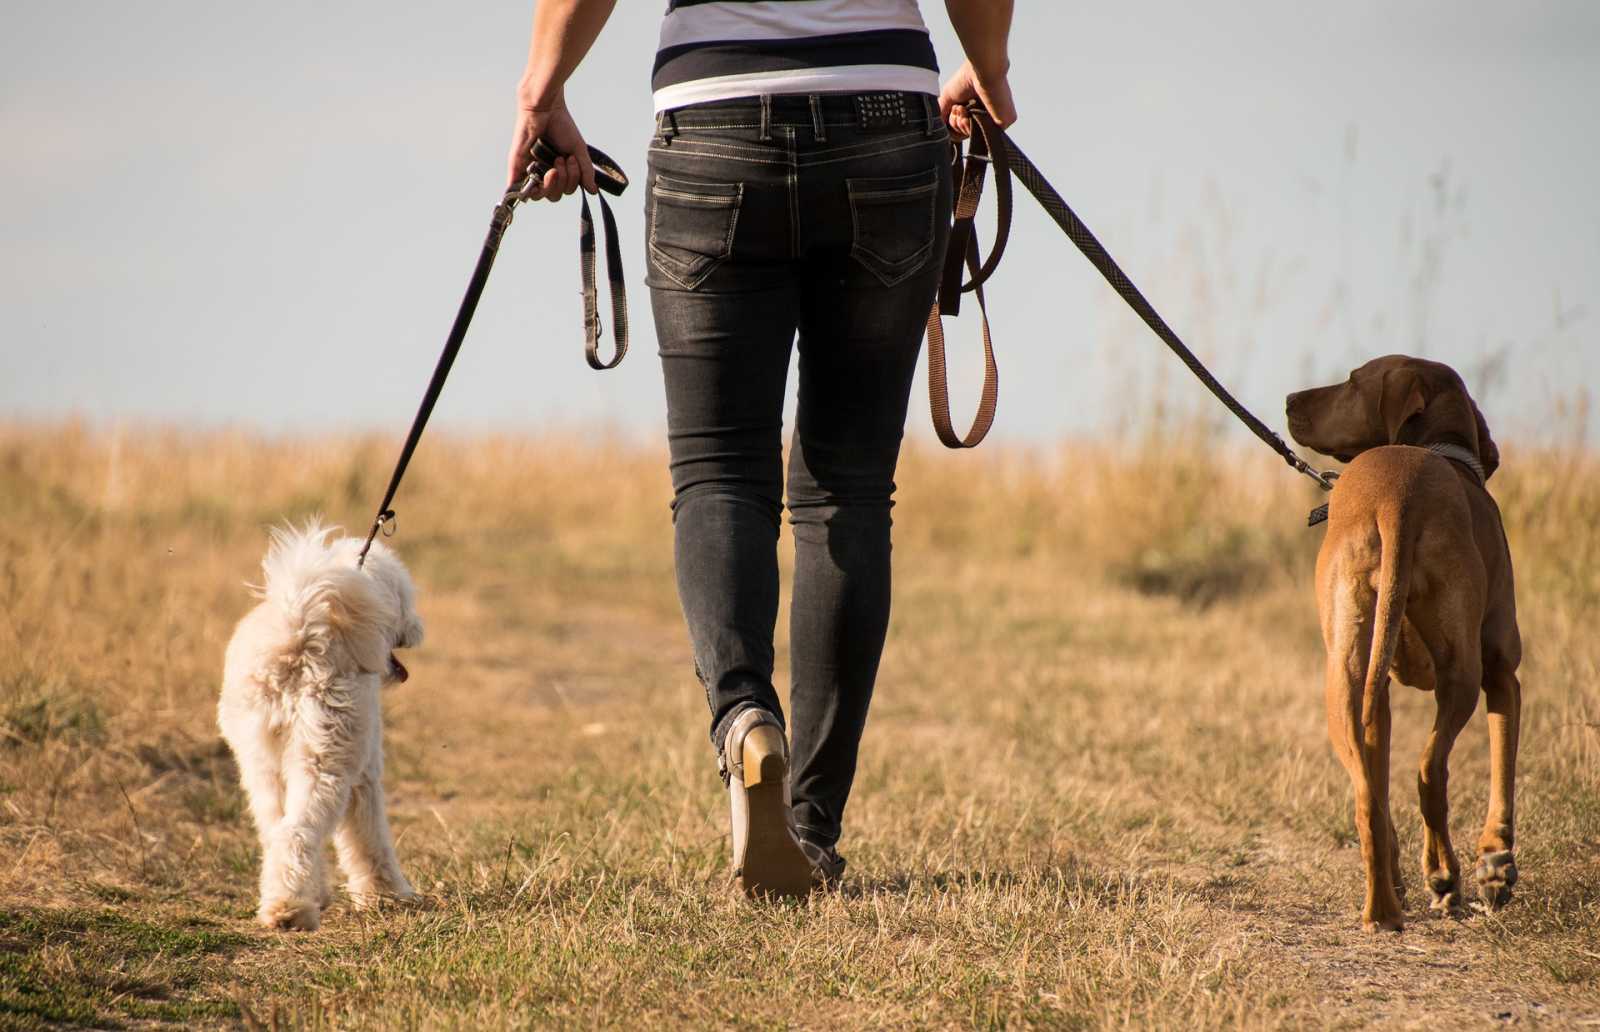 a person walking dogs on leashes